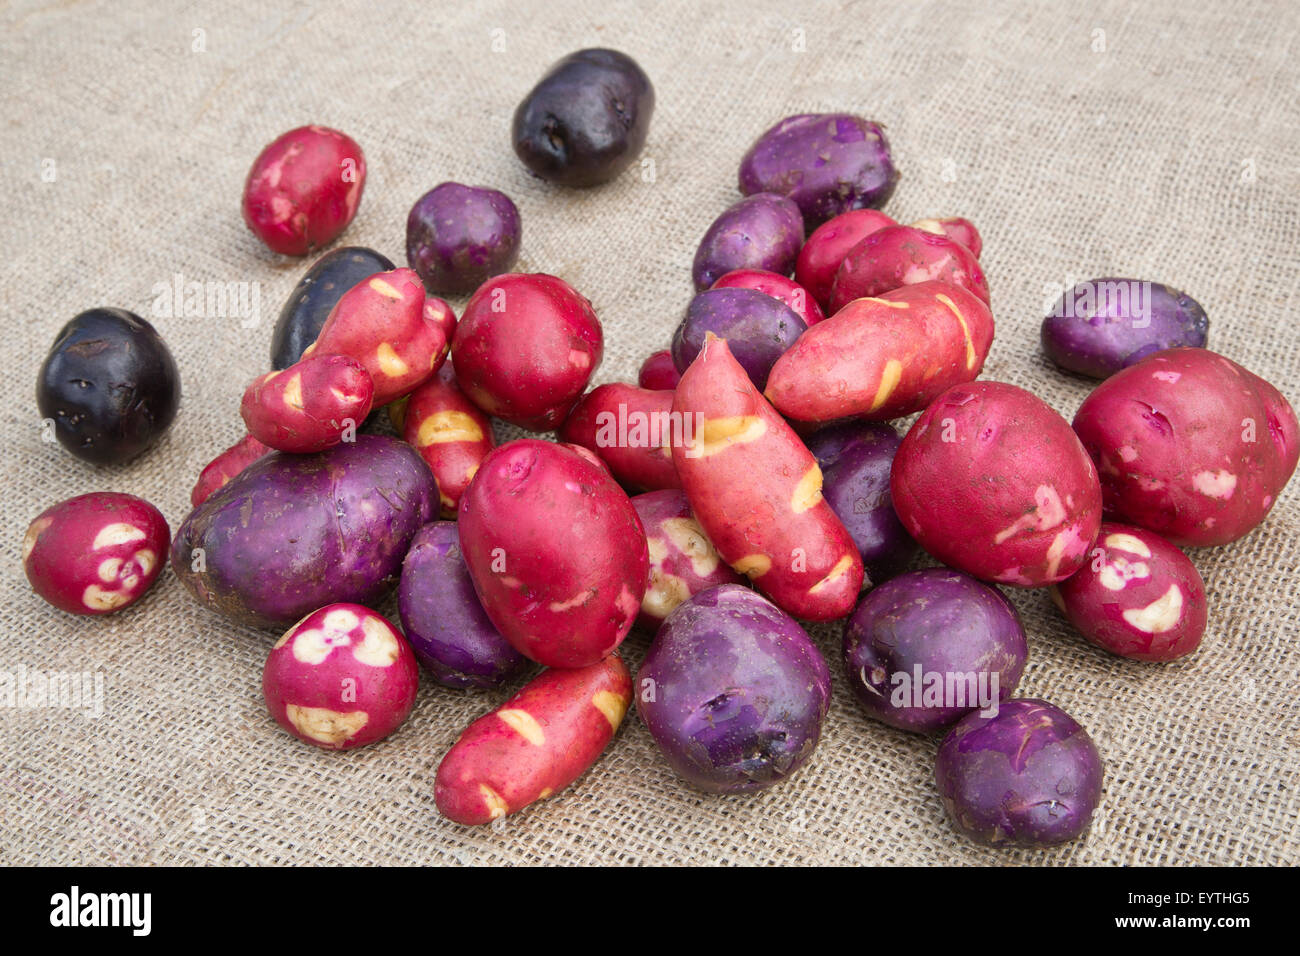 Washed & processed potato varieties harvested in Alaska. Stock Photo